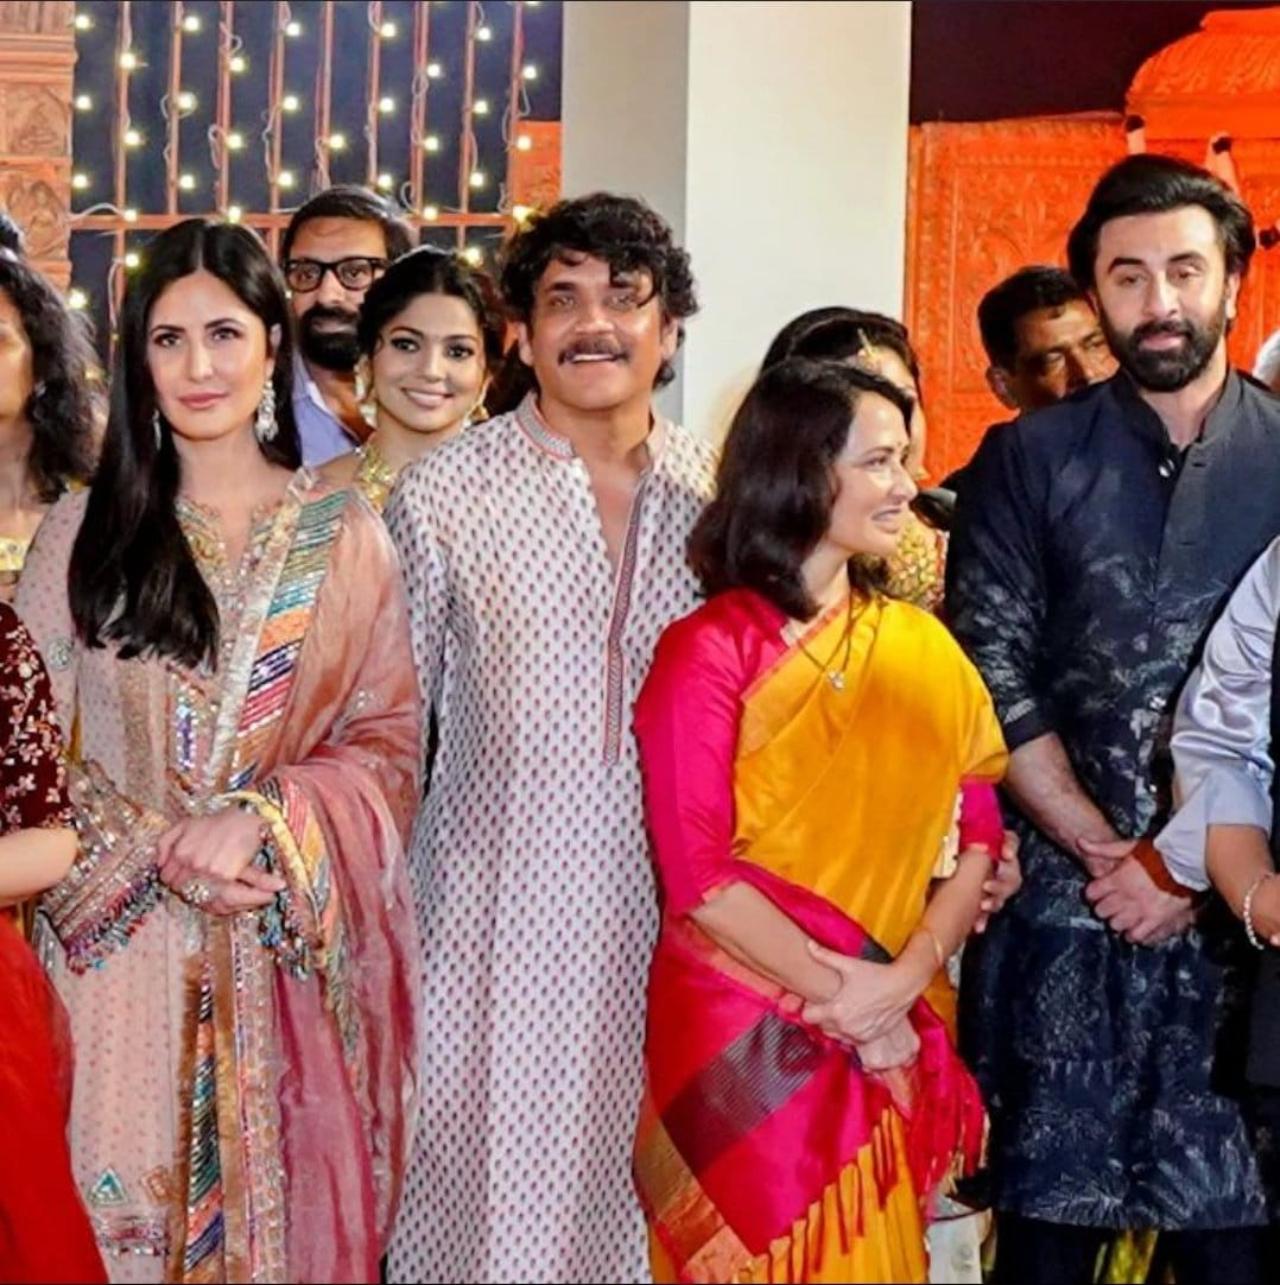 Ranbir Kapoor and Katrina Kaif who have dated in the past were seen together at a venue after a long time. The pictures from the event soon went viral on social media. In the pictures, Ranbir and Katrina can be seen standing at a distance from each other. While Katrina stood beside R Madhavan, Ranbir was accompanied by his Brahmastra co-star Nagarjuna